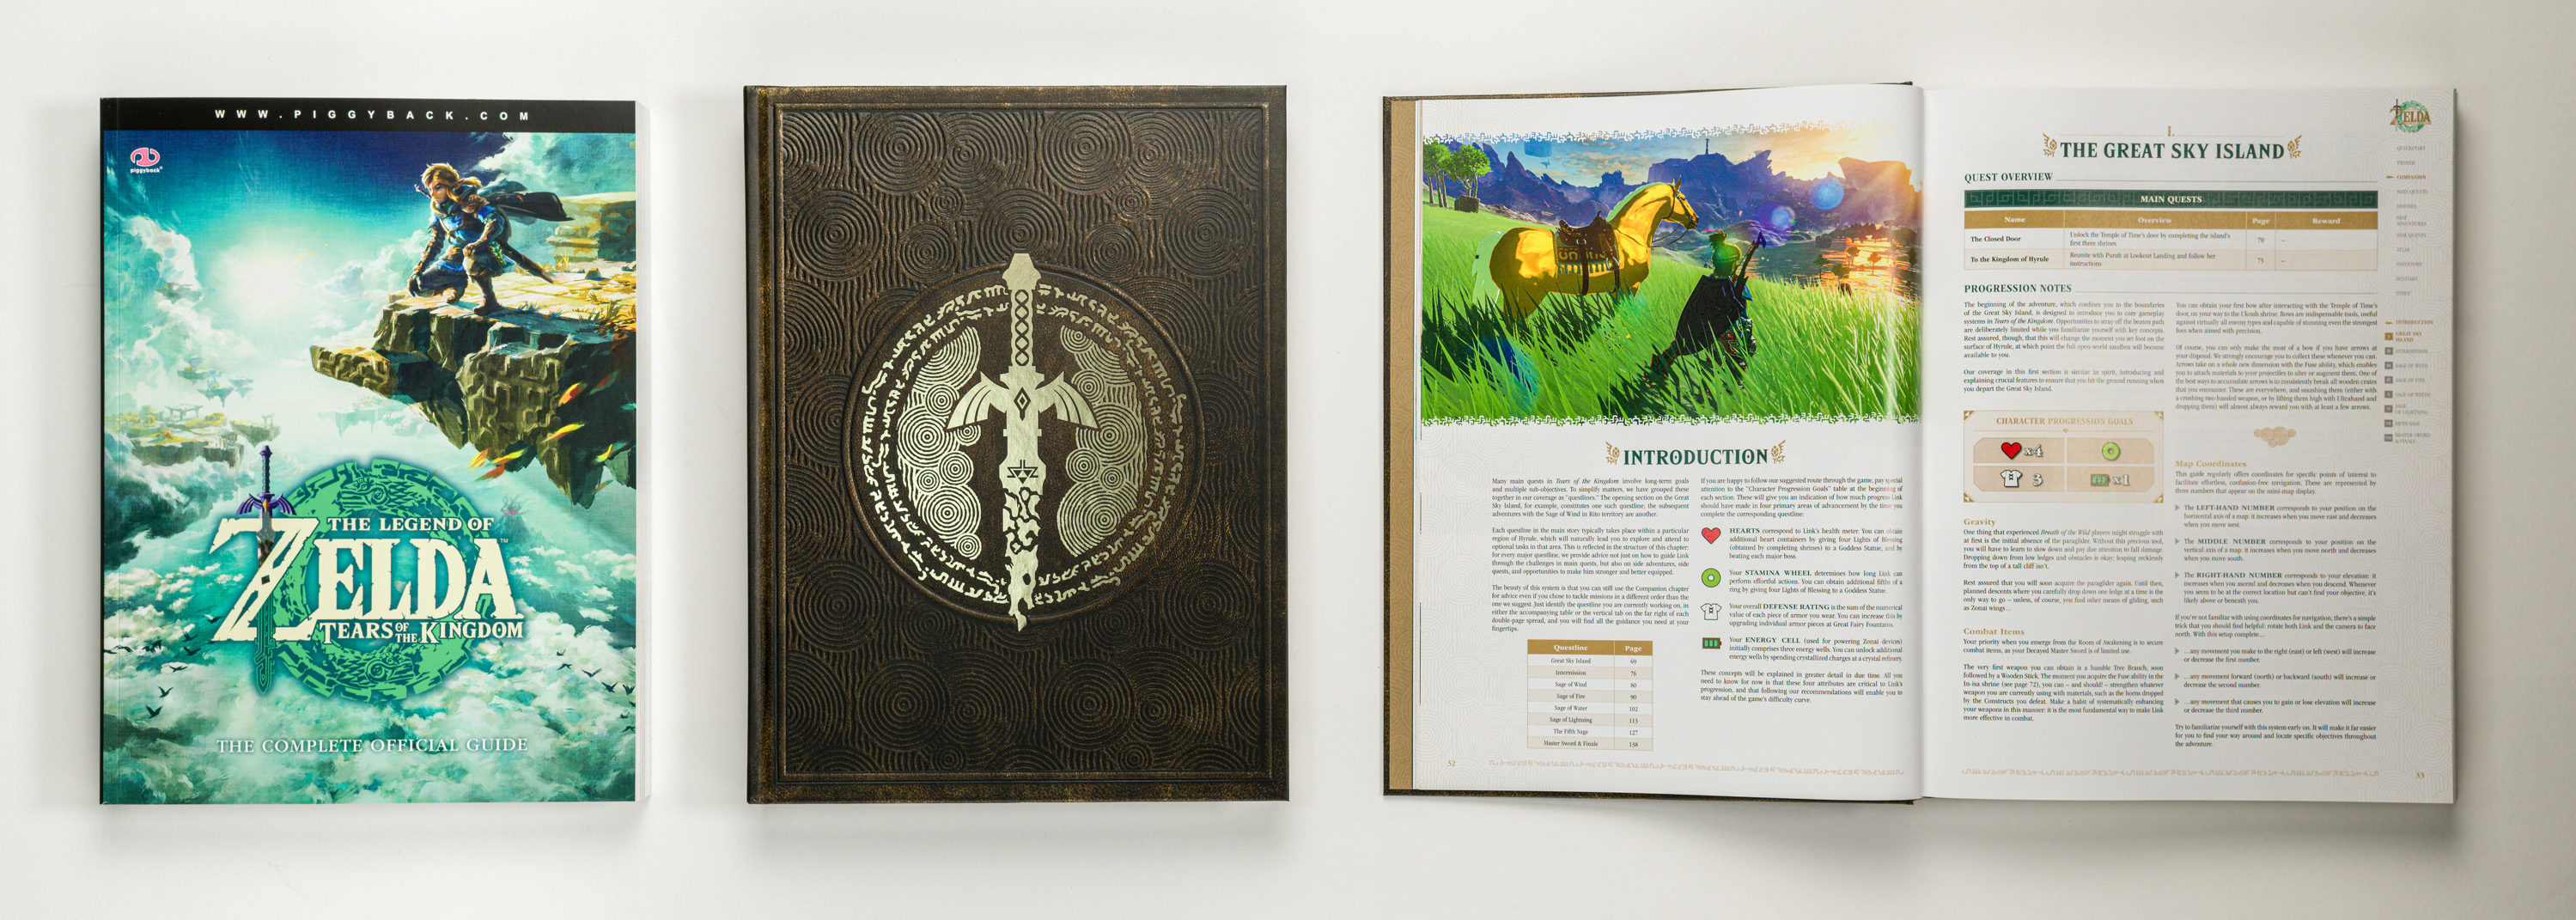 The Legend of Zelda: Tears of the Kingdom - Complete Buying Guide